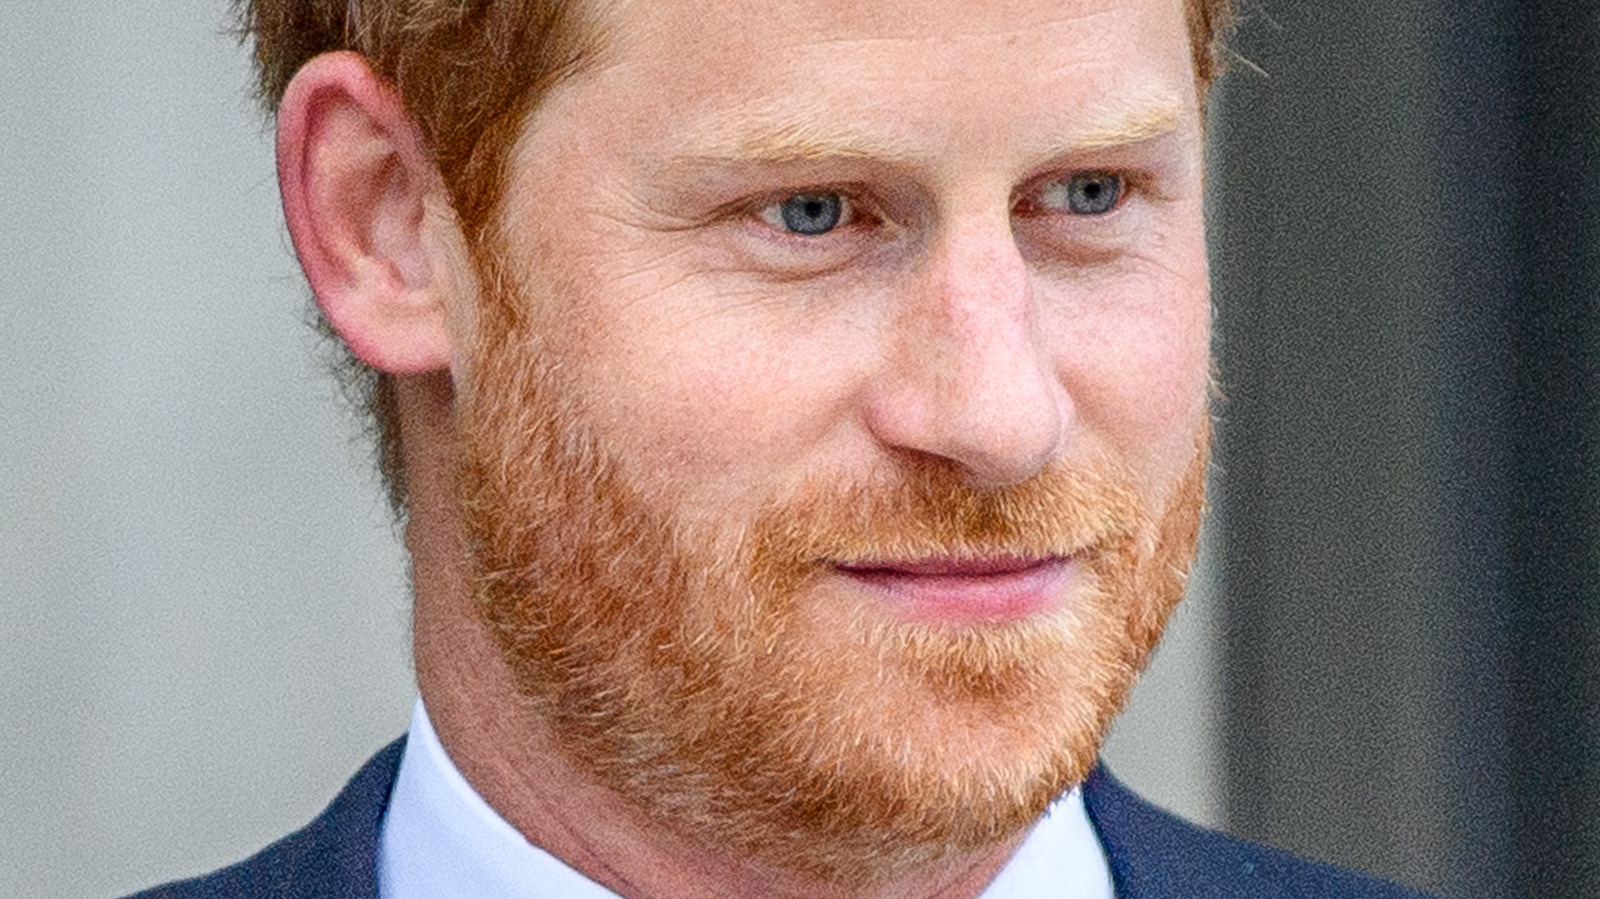 The Sweet Tribute Prince Harry Paid To Archie Is Warming Hearts